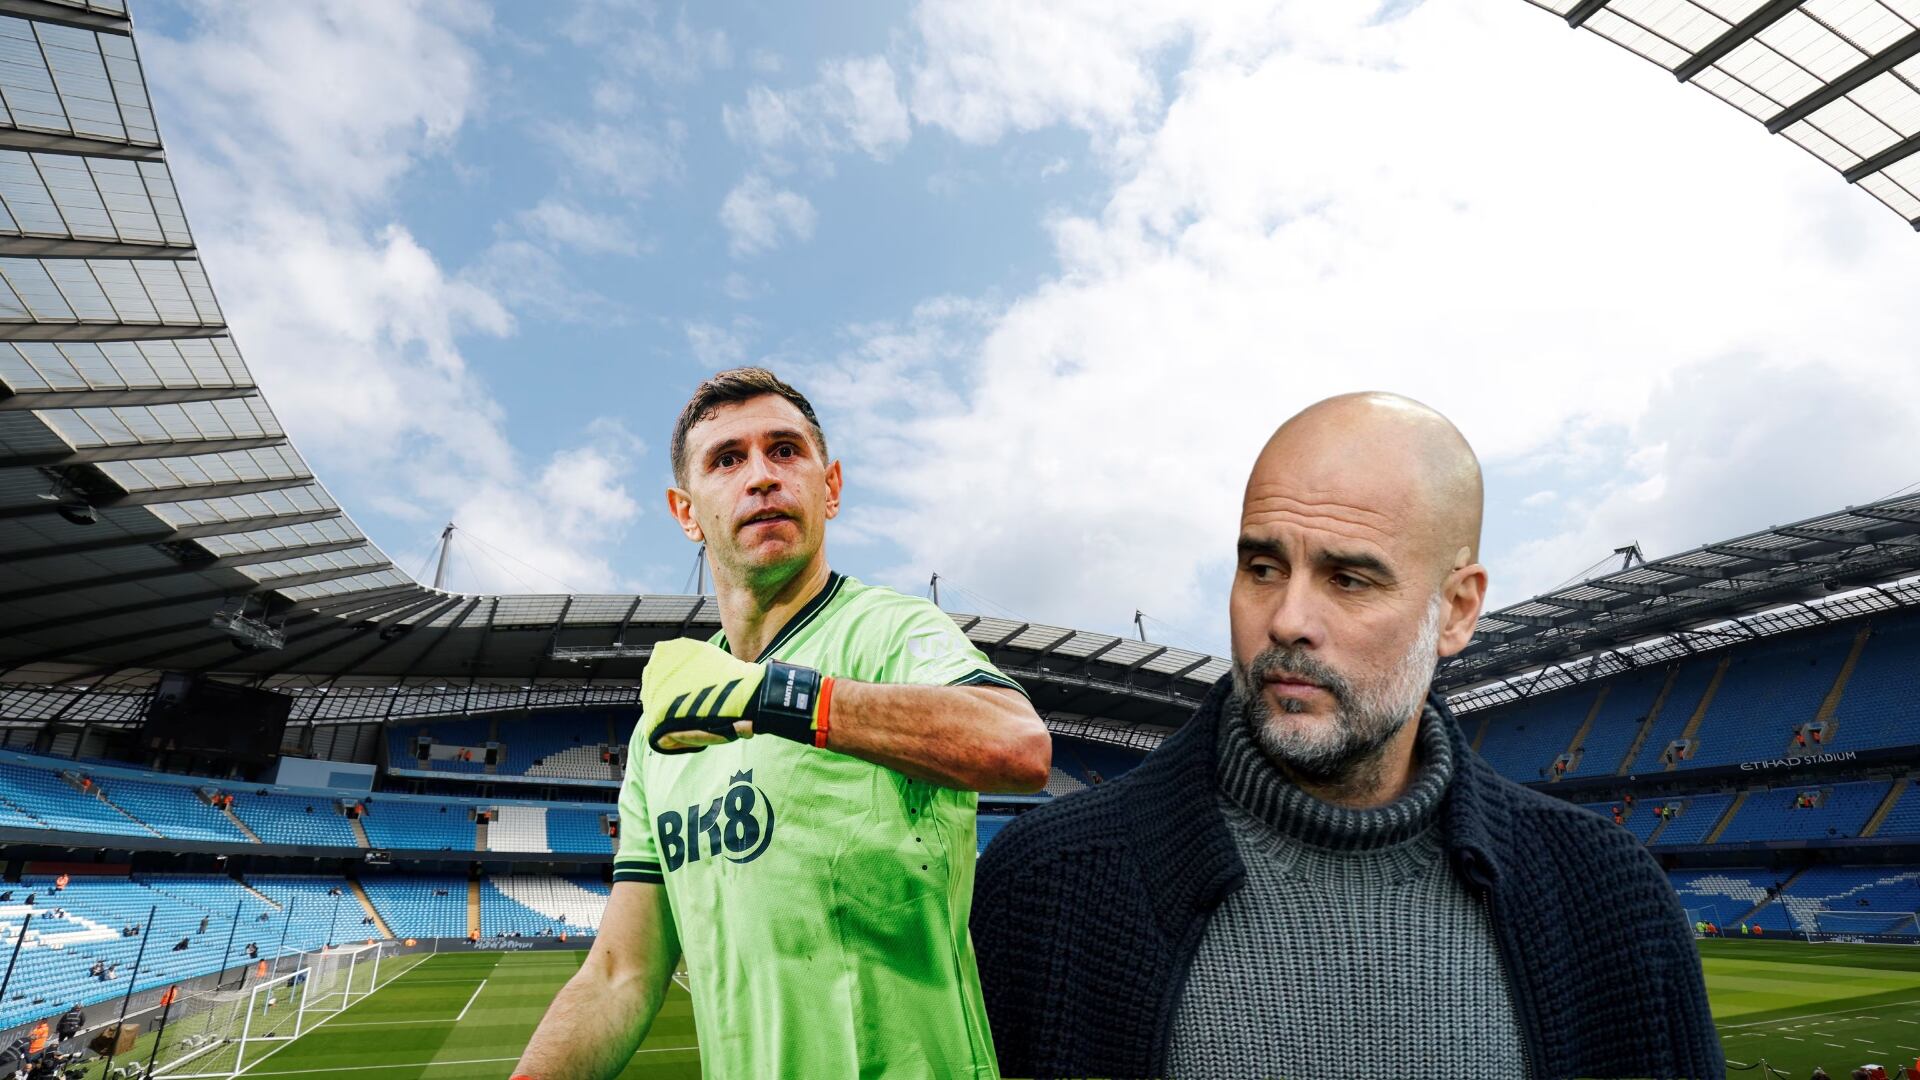 Dibu Martinez could arrive to Manchester City, Guardiola wants a goalkeeper and City could sign him for this amount